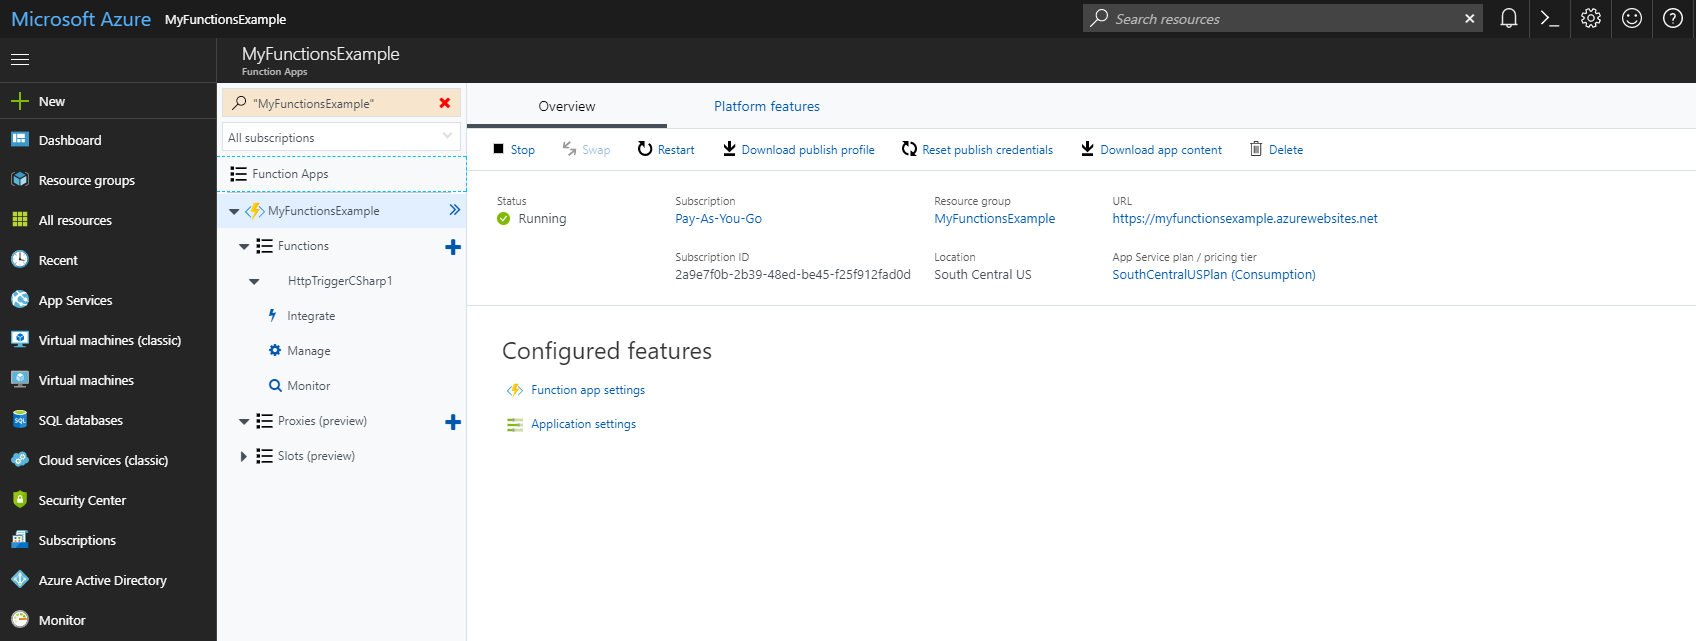 Azure Functions Overview tab in the portal